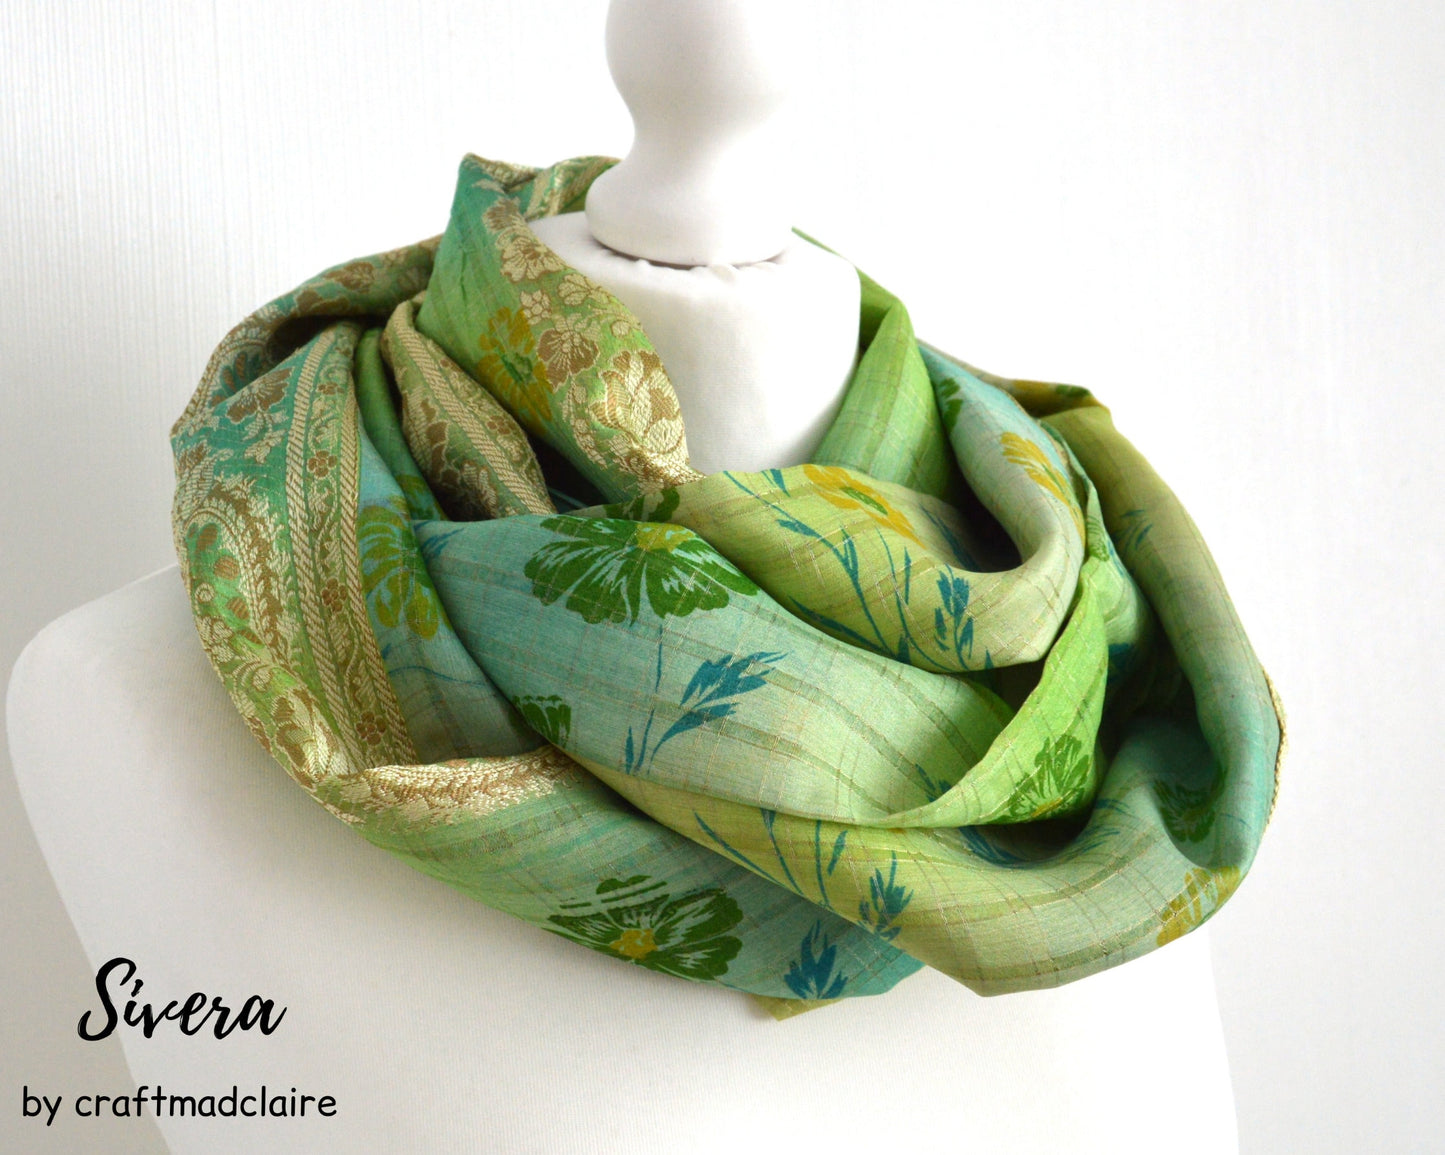 Lime Floral Brocade Upcycled Sari Silk Scarf - Eco Friendly Sari Silk Womens Scarf - Bohemian Zero Waste Spring Summer Gift for Her